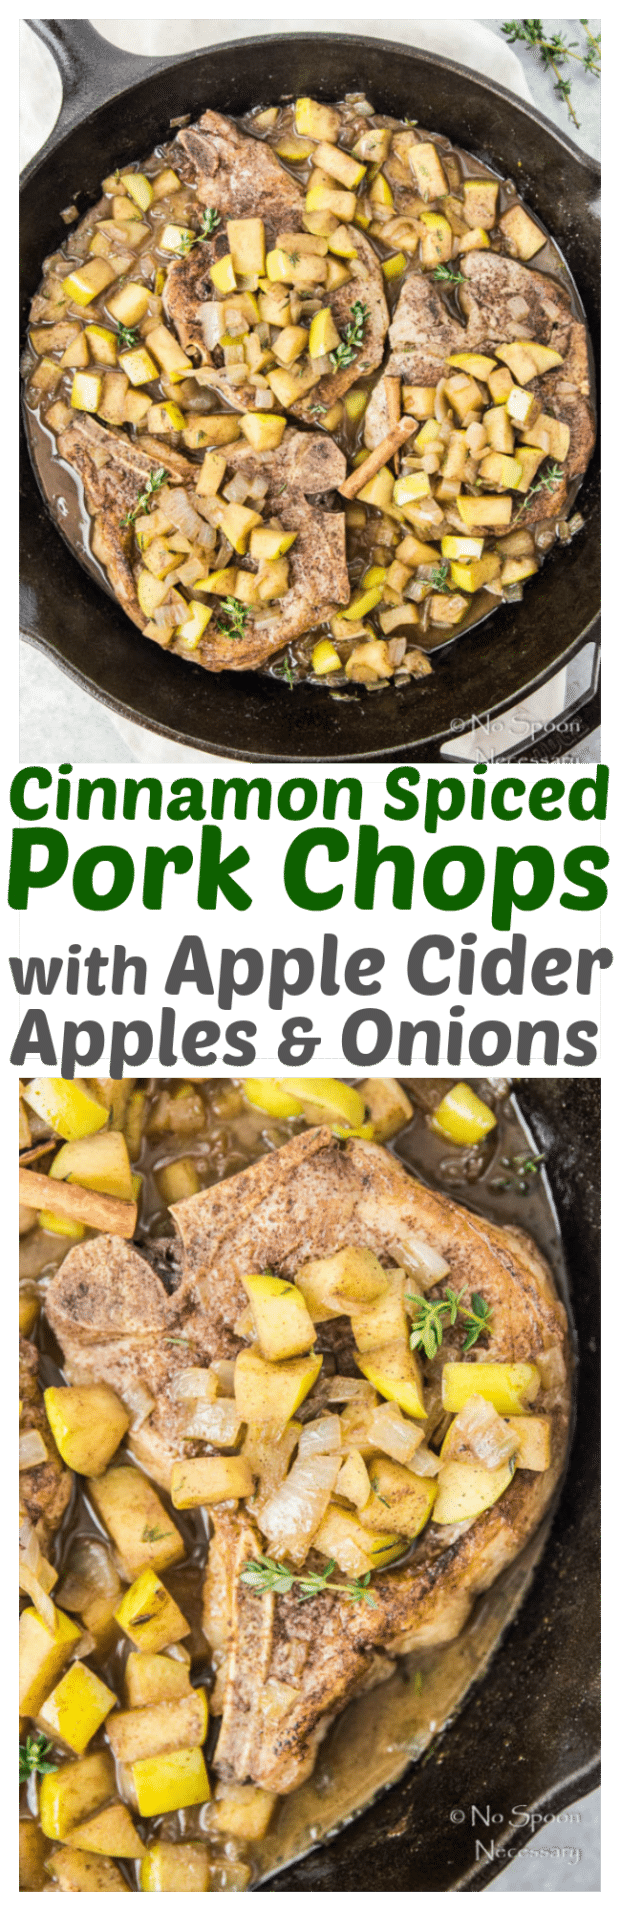 cinnamon-spiced-pork-chops-with-apple-cider-apples-onions-long-pin1